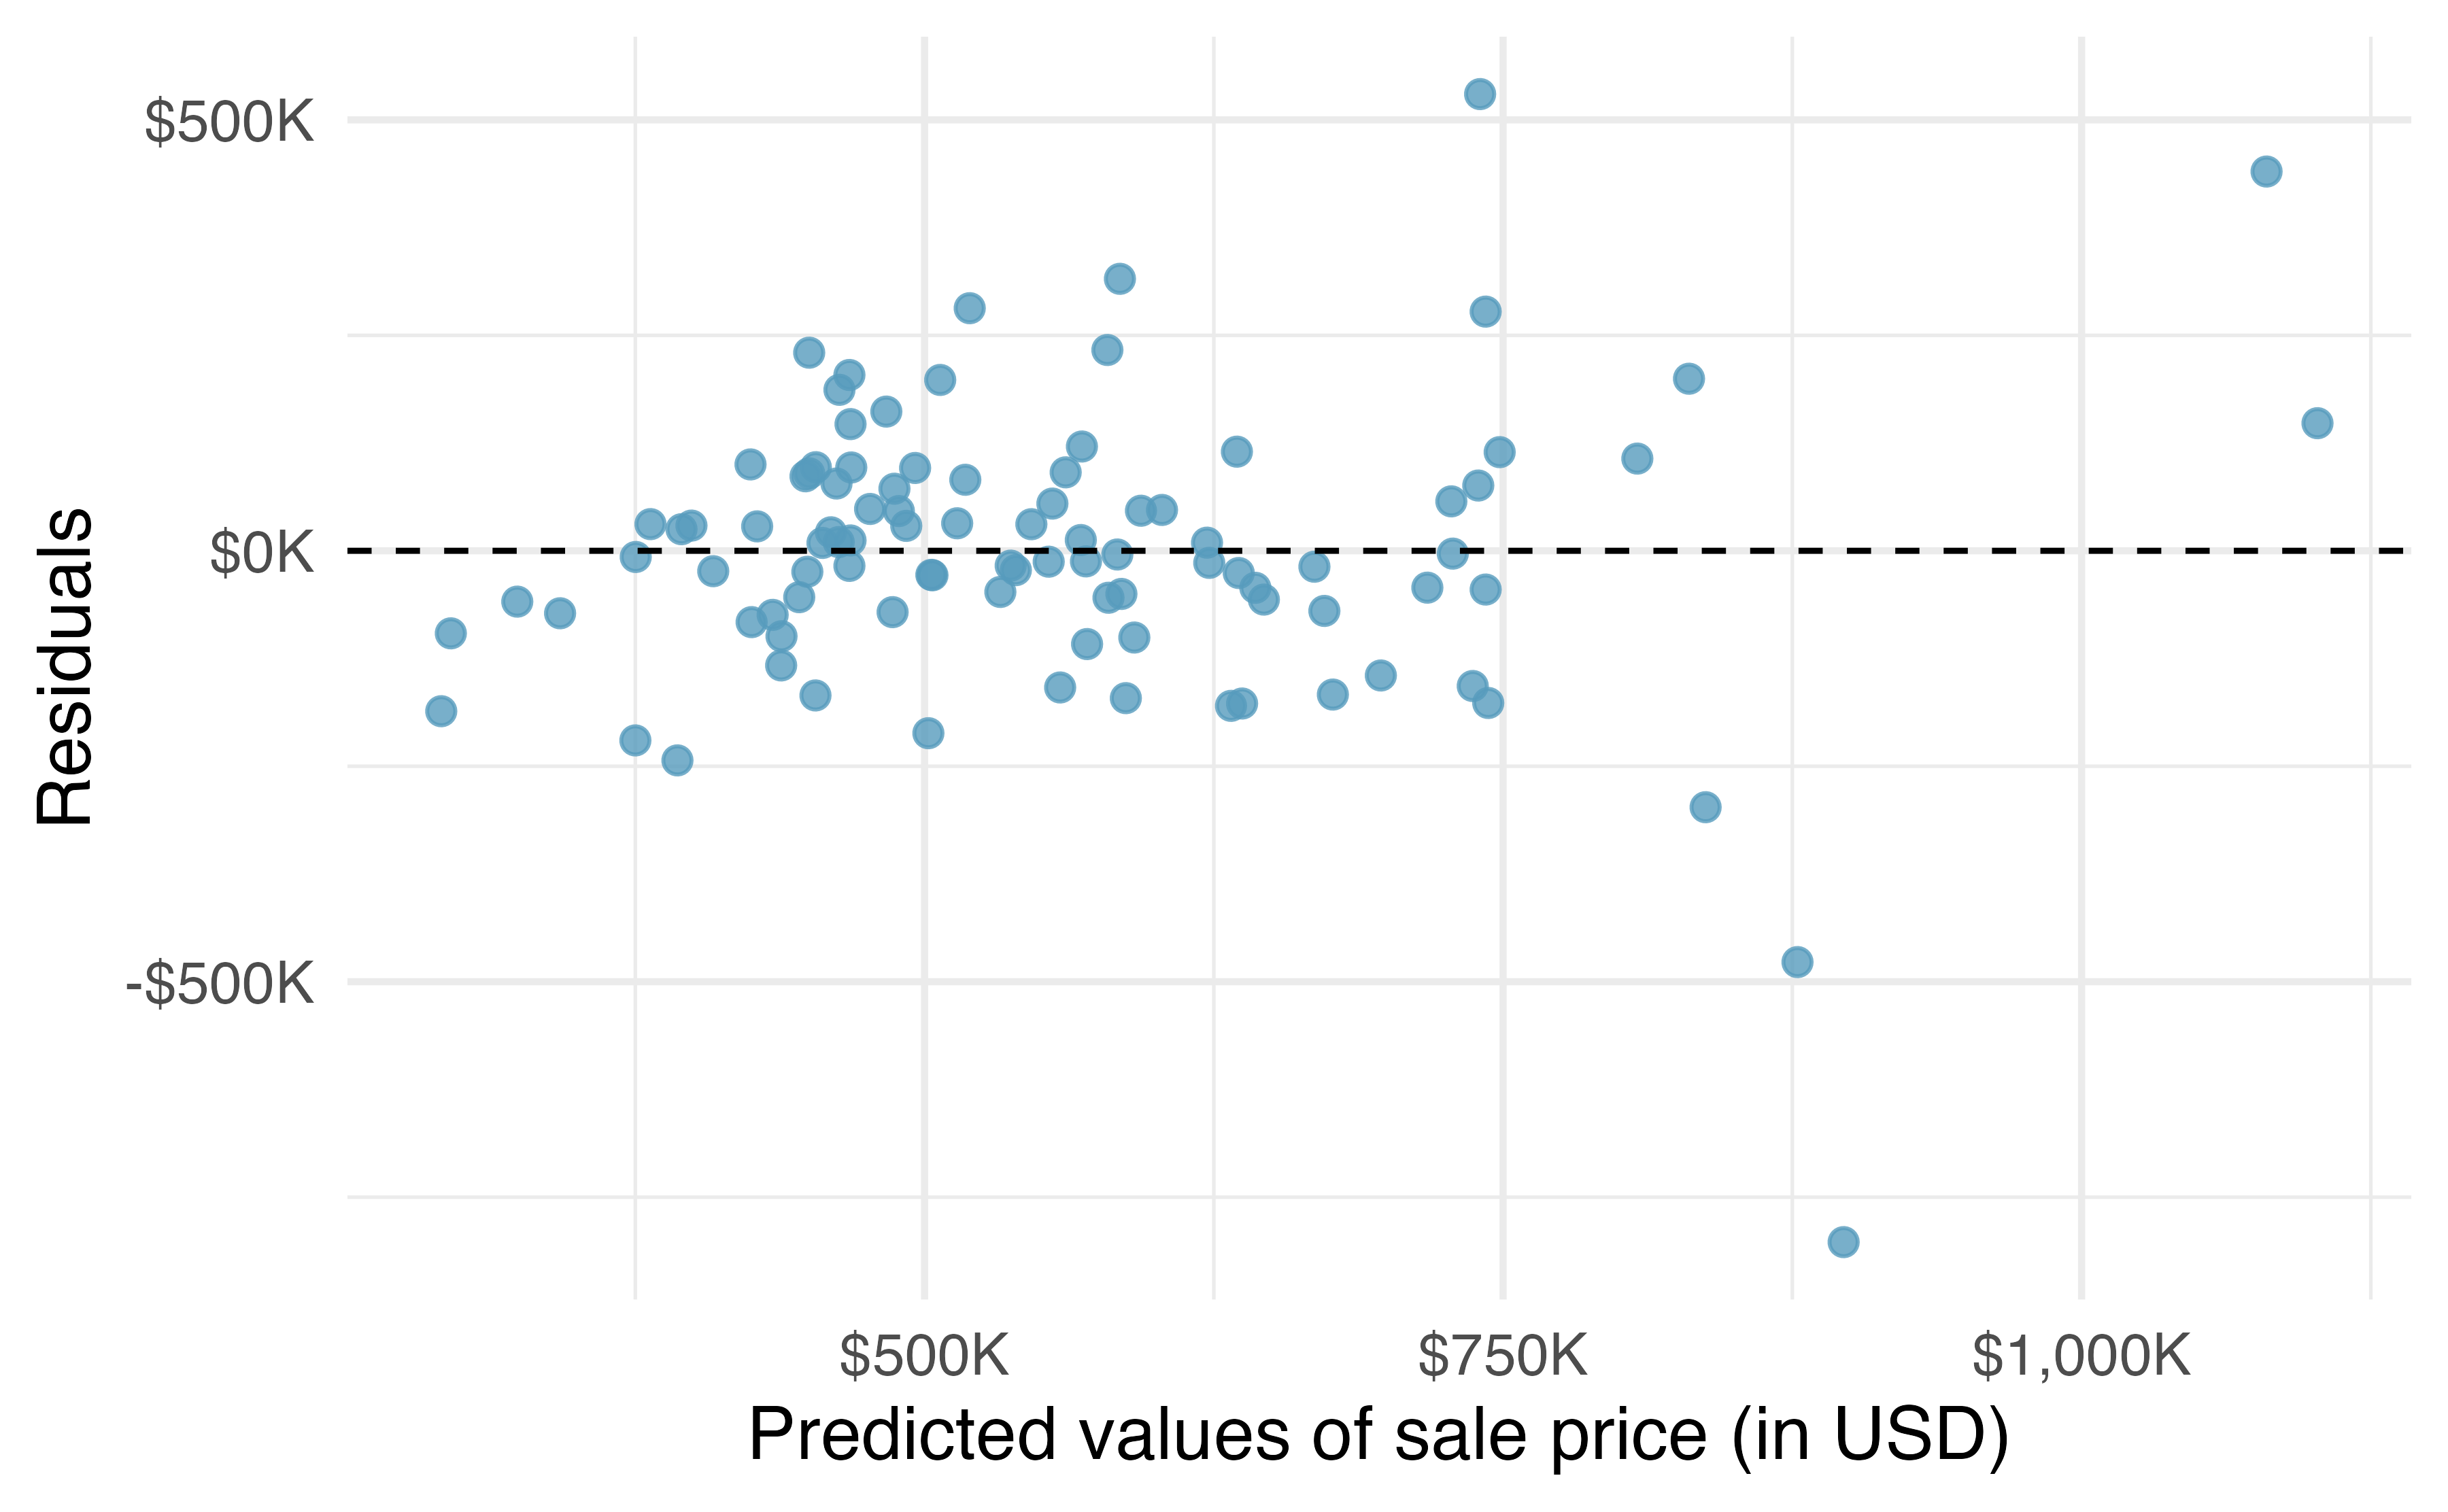 Residuals versus predicted values for the model predicting sale price from area of home.